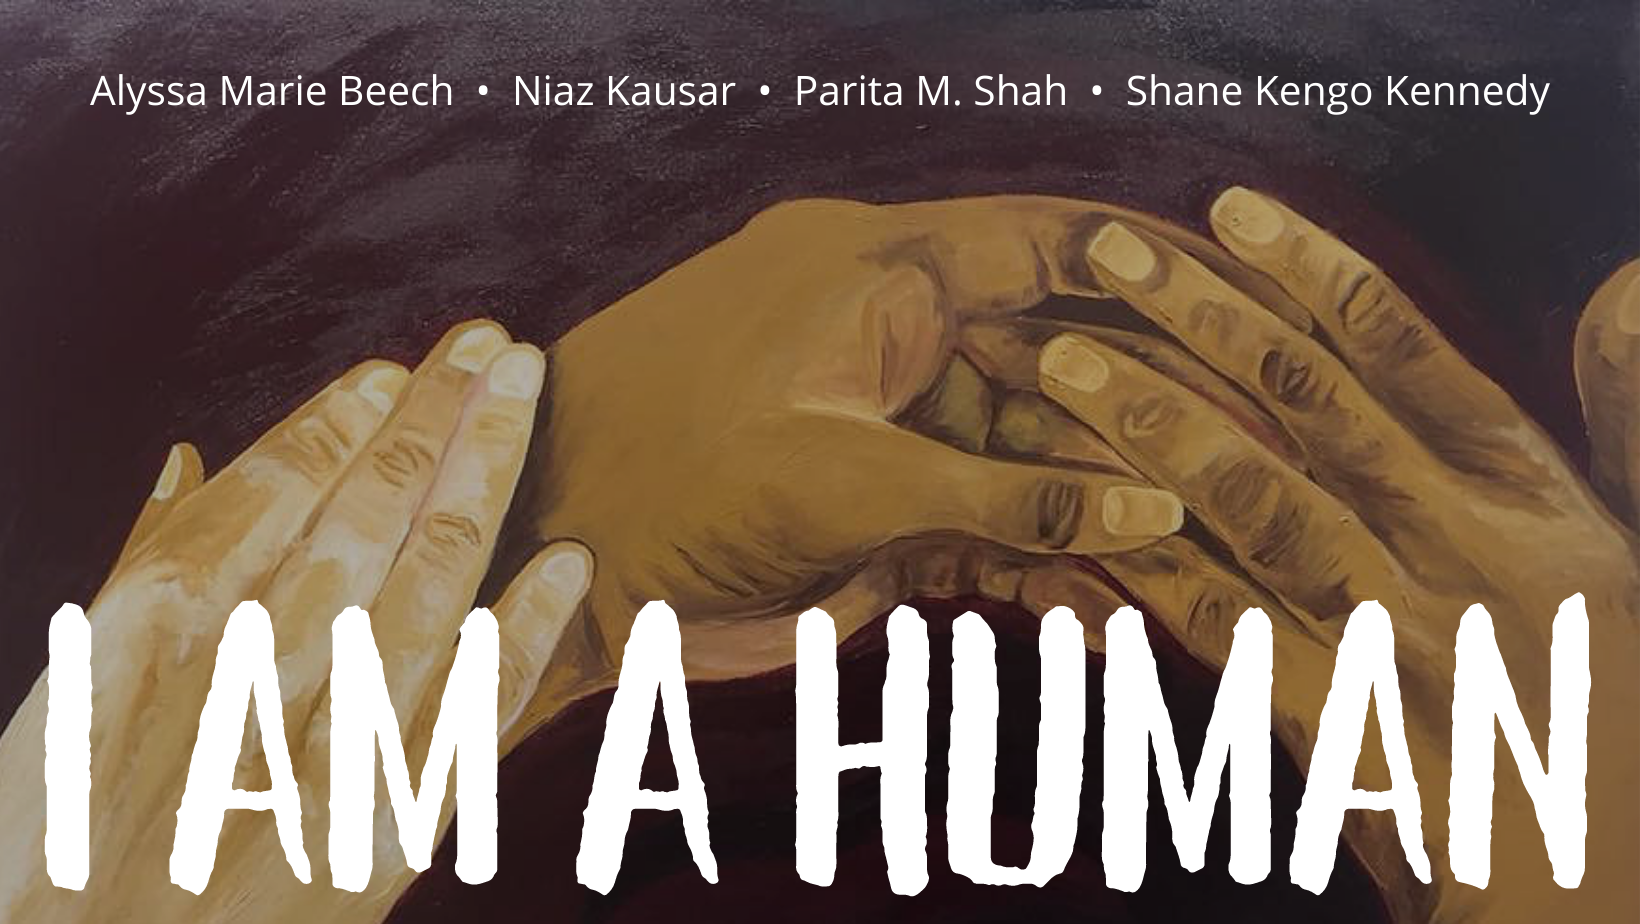 I AM A HUMAN exhibition graphic